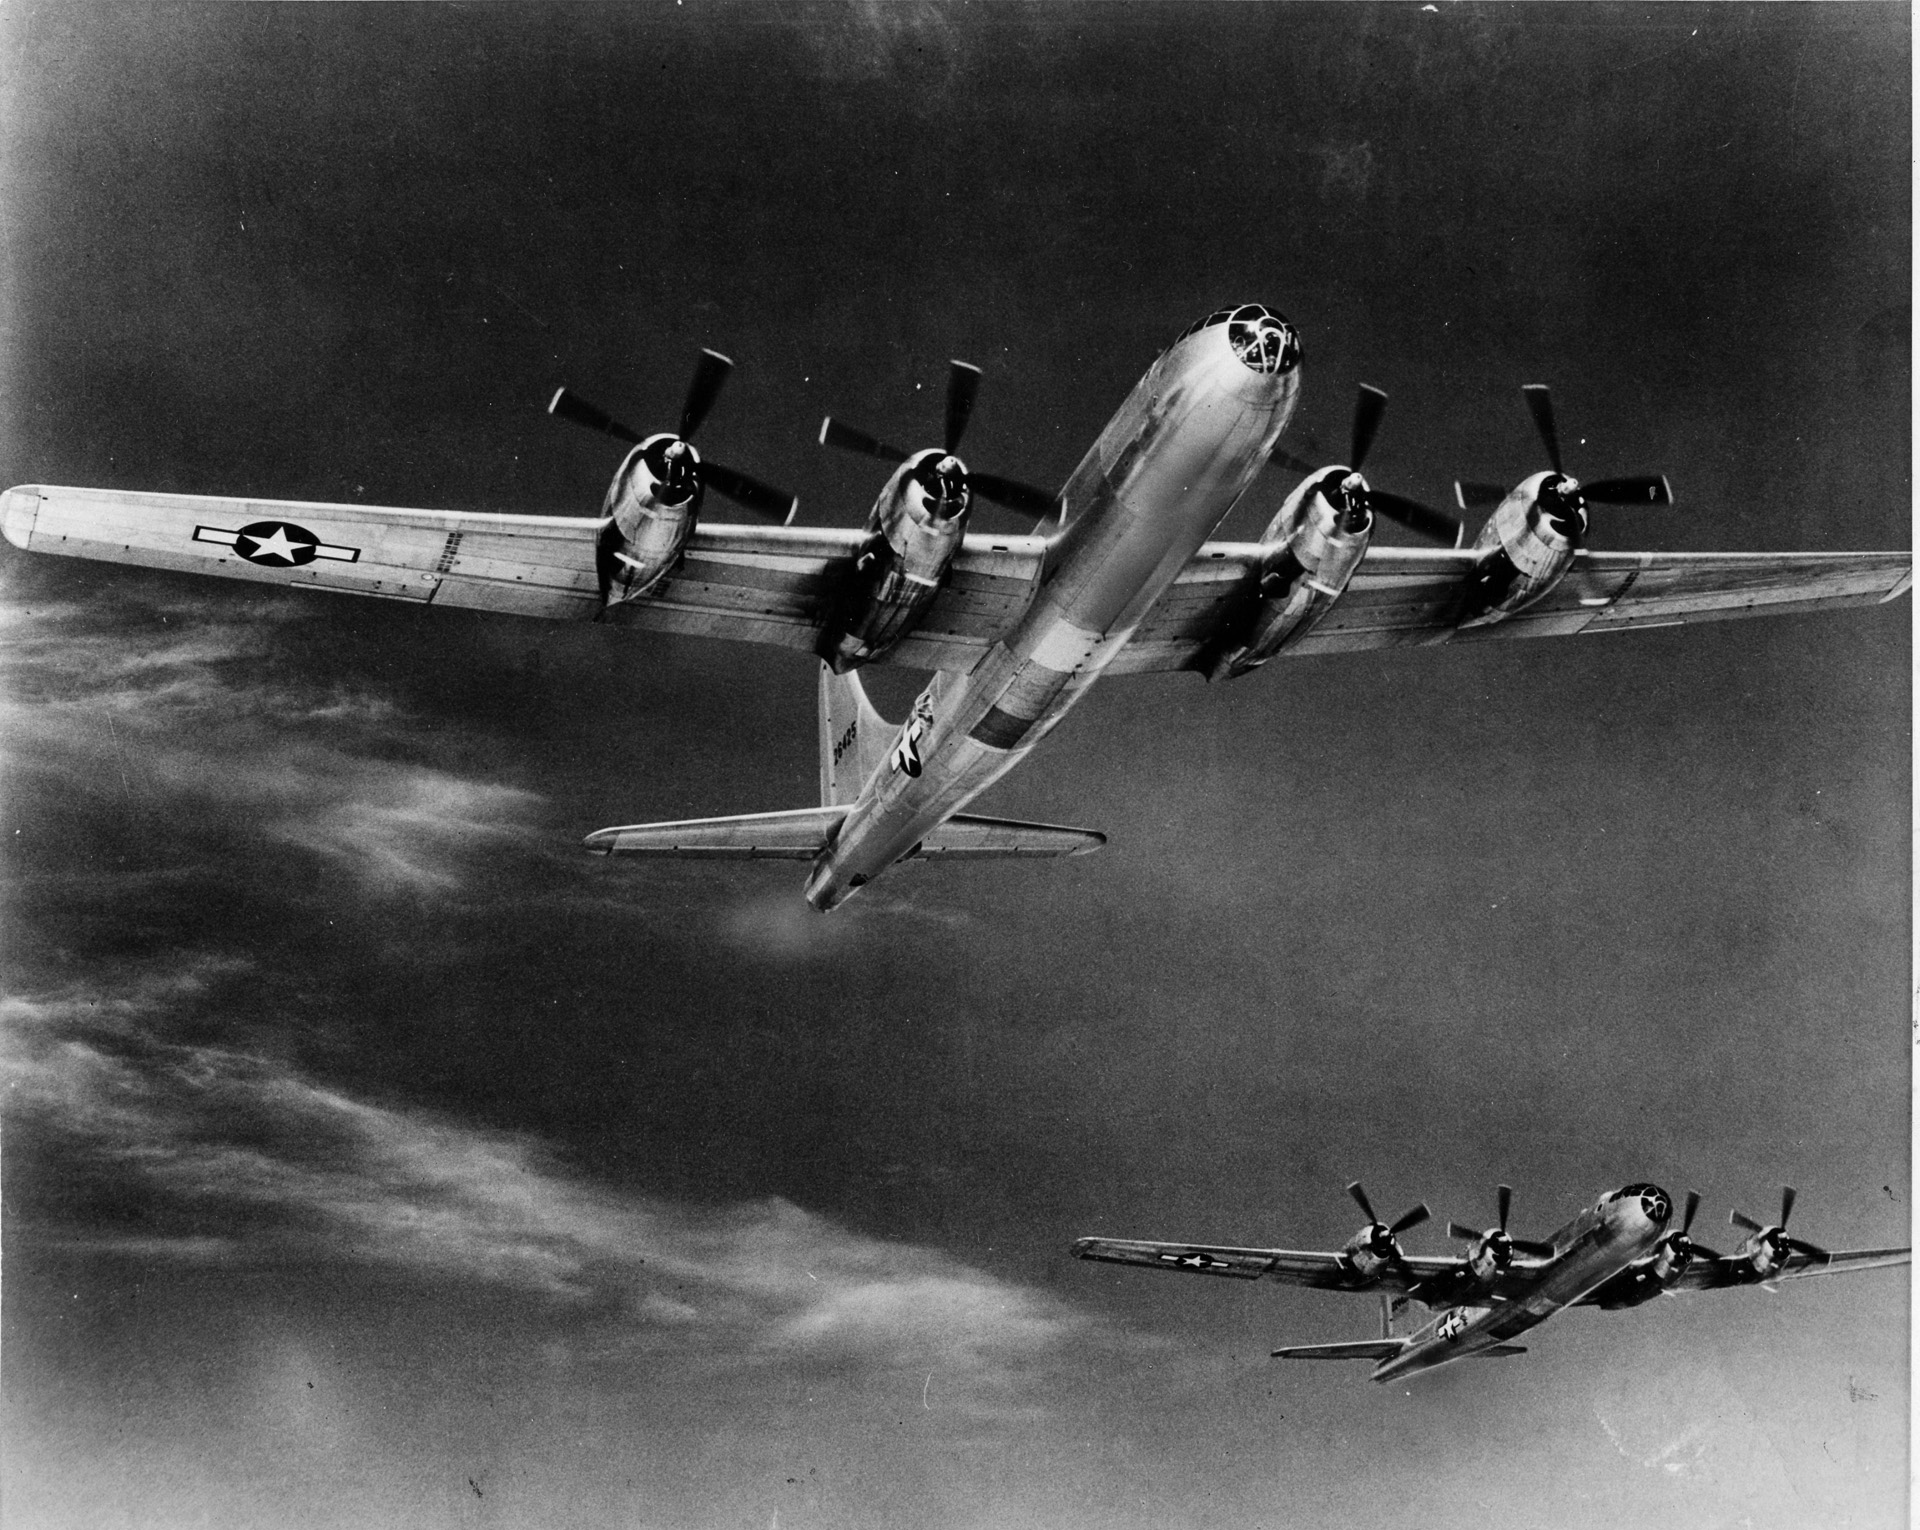 Operation Meetinghouse: Part of an armada of B-29 bombers on their way to bomb Tokyo, March 9-10, 1945.  With over 100,000 people killed, a million left homeless, and nearly 16 square miles of the city reduced to ashes, the raid is considered the single most destructive aerial attack of the war.